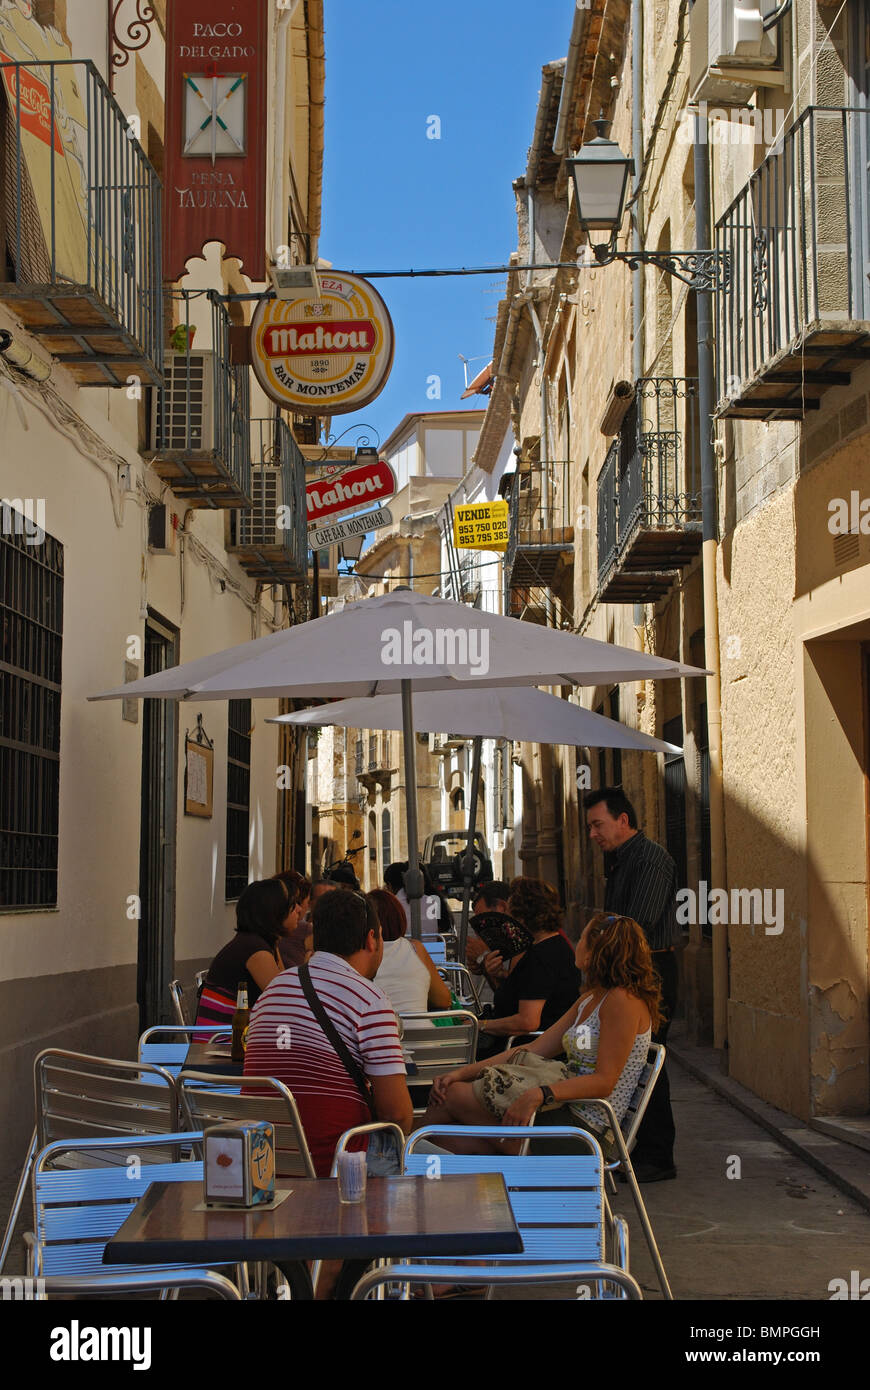 Cafe in side street off the Plaza de Andalucia, Ubeda, Jaen Province, Andalucia, Spain, Western Europe. Stock Photo